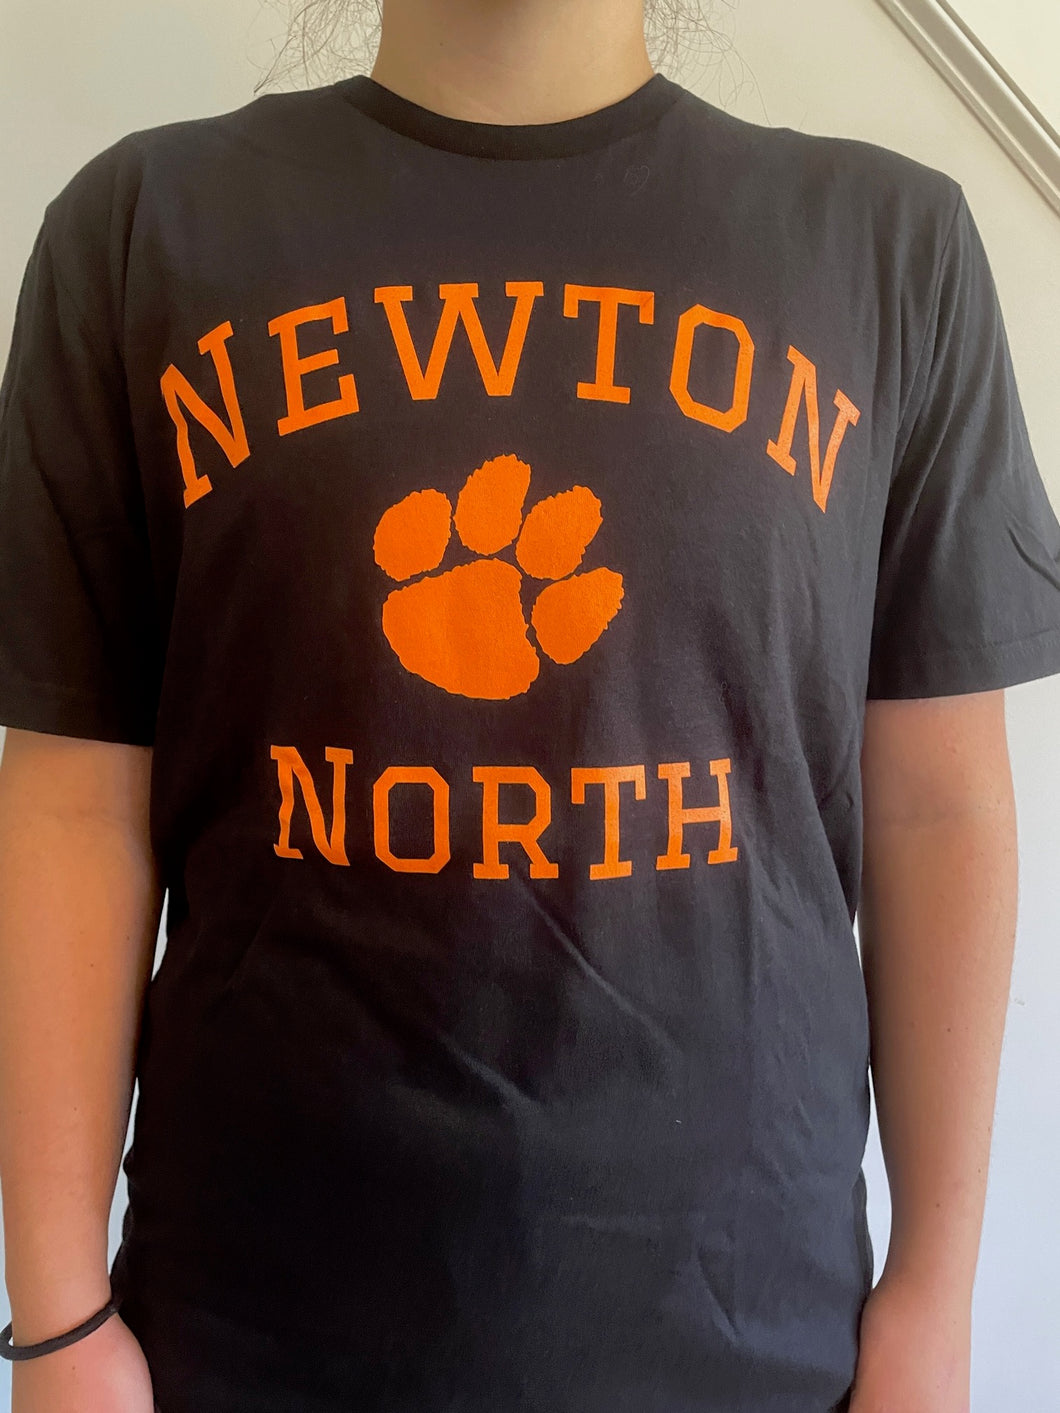 Newton North With Paw Print T-Shirt